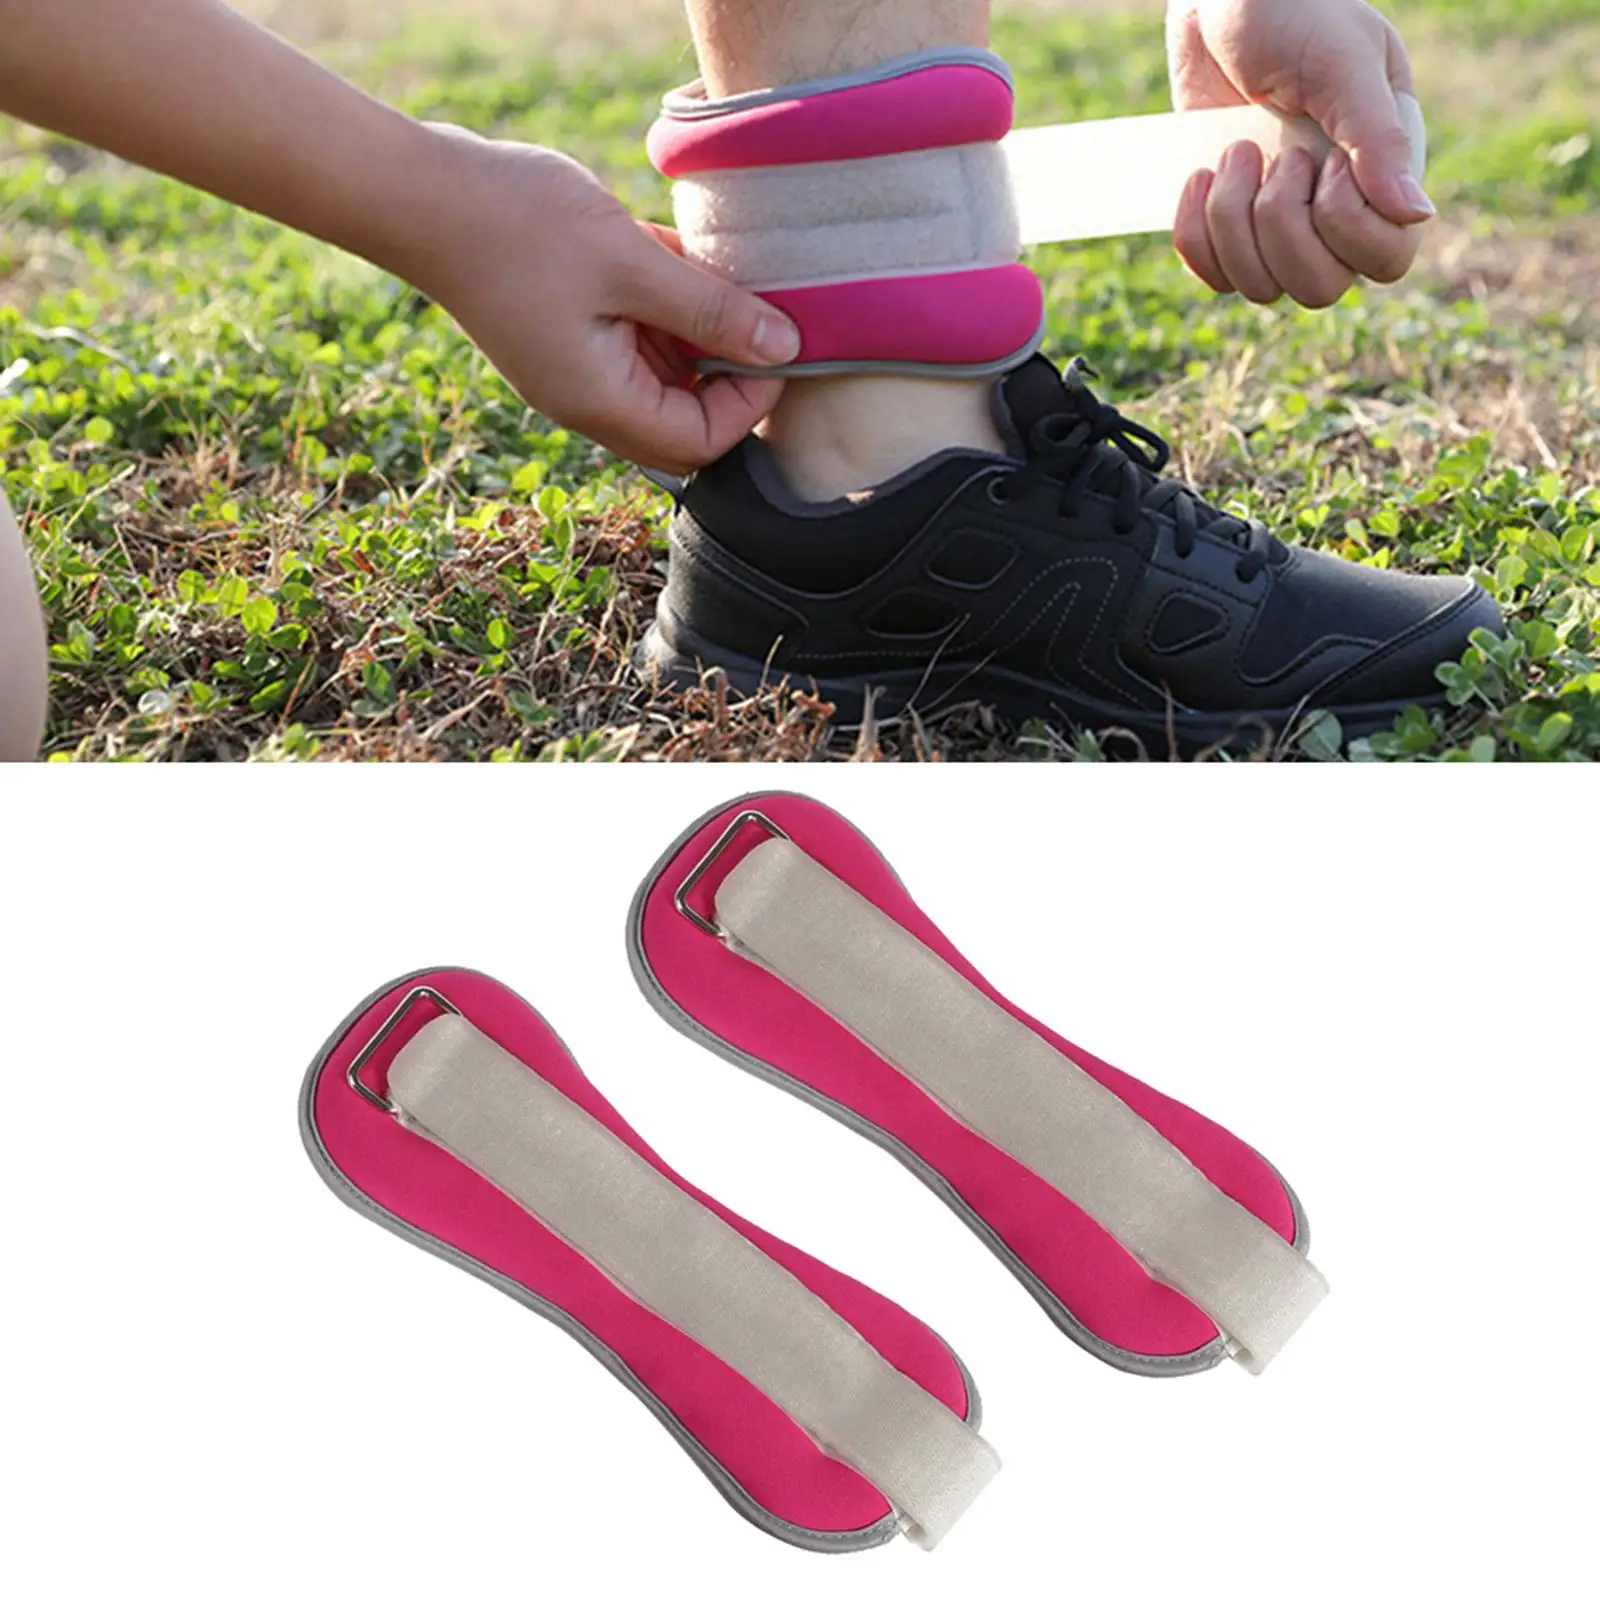 Compact Ankle Weights Women Wrist Weight Strap Bracelet Workout Fitness Gear